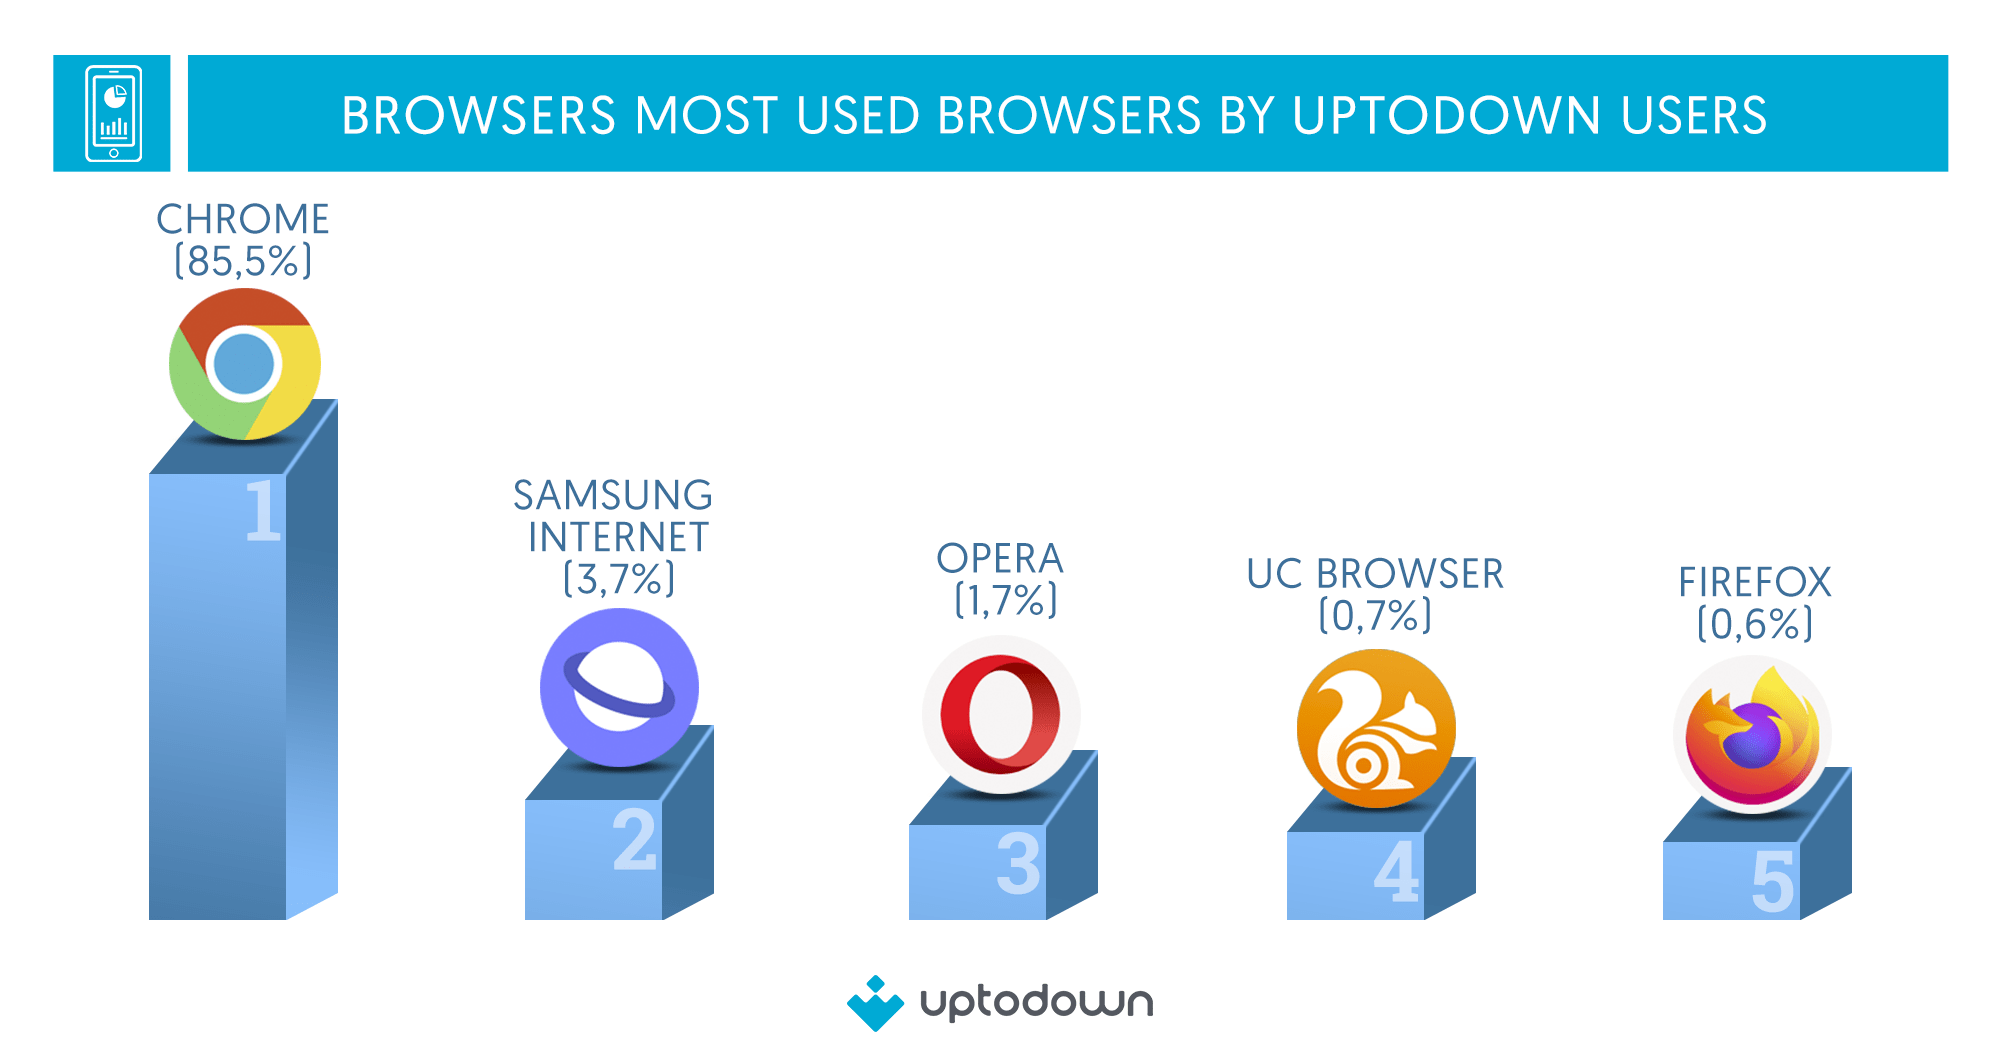 BROWSERS